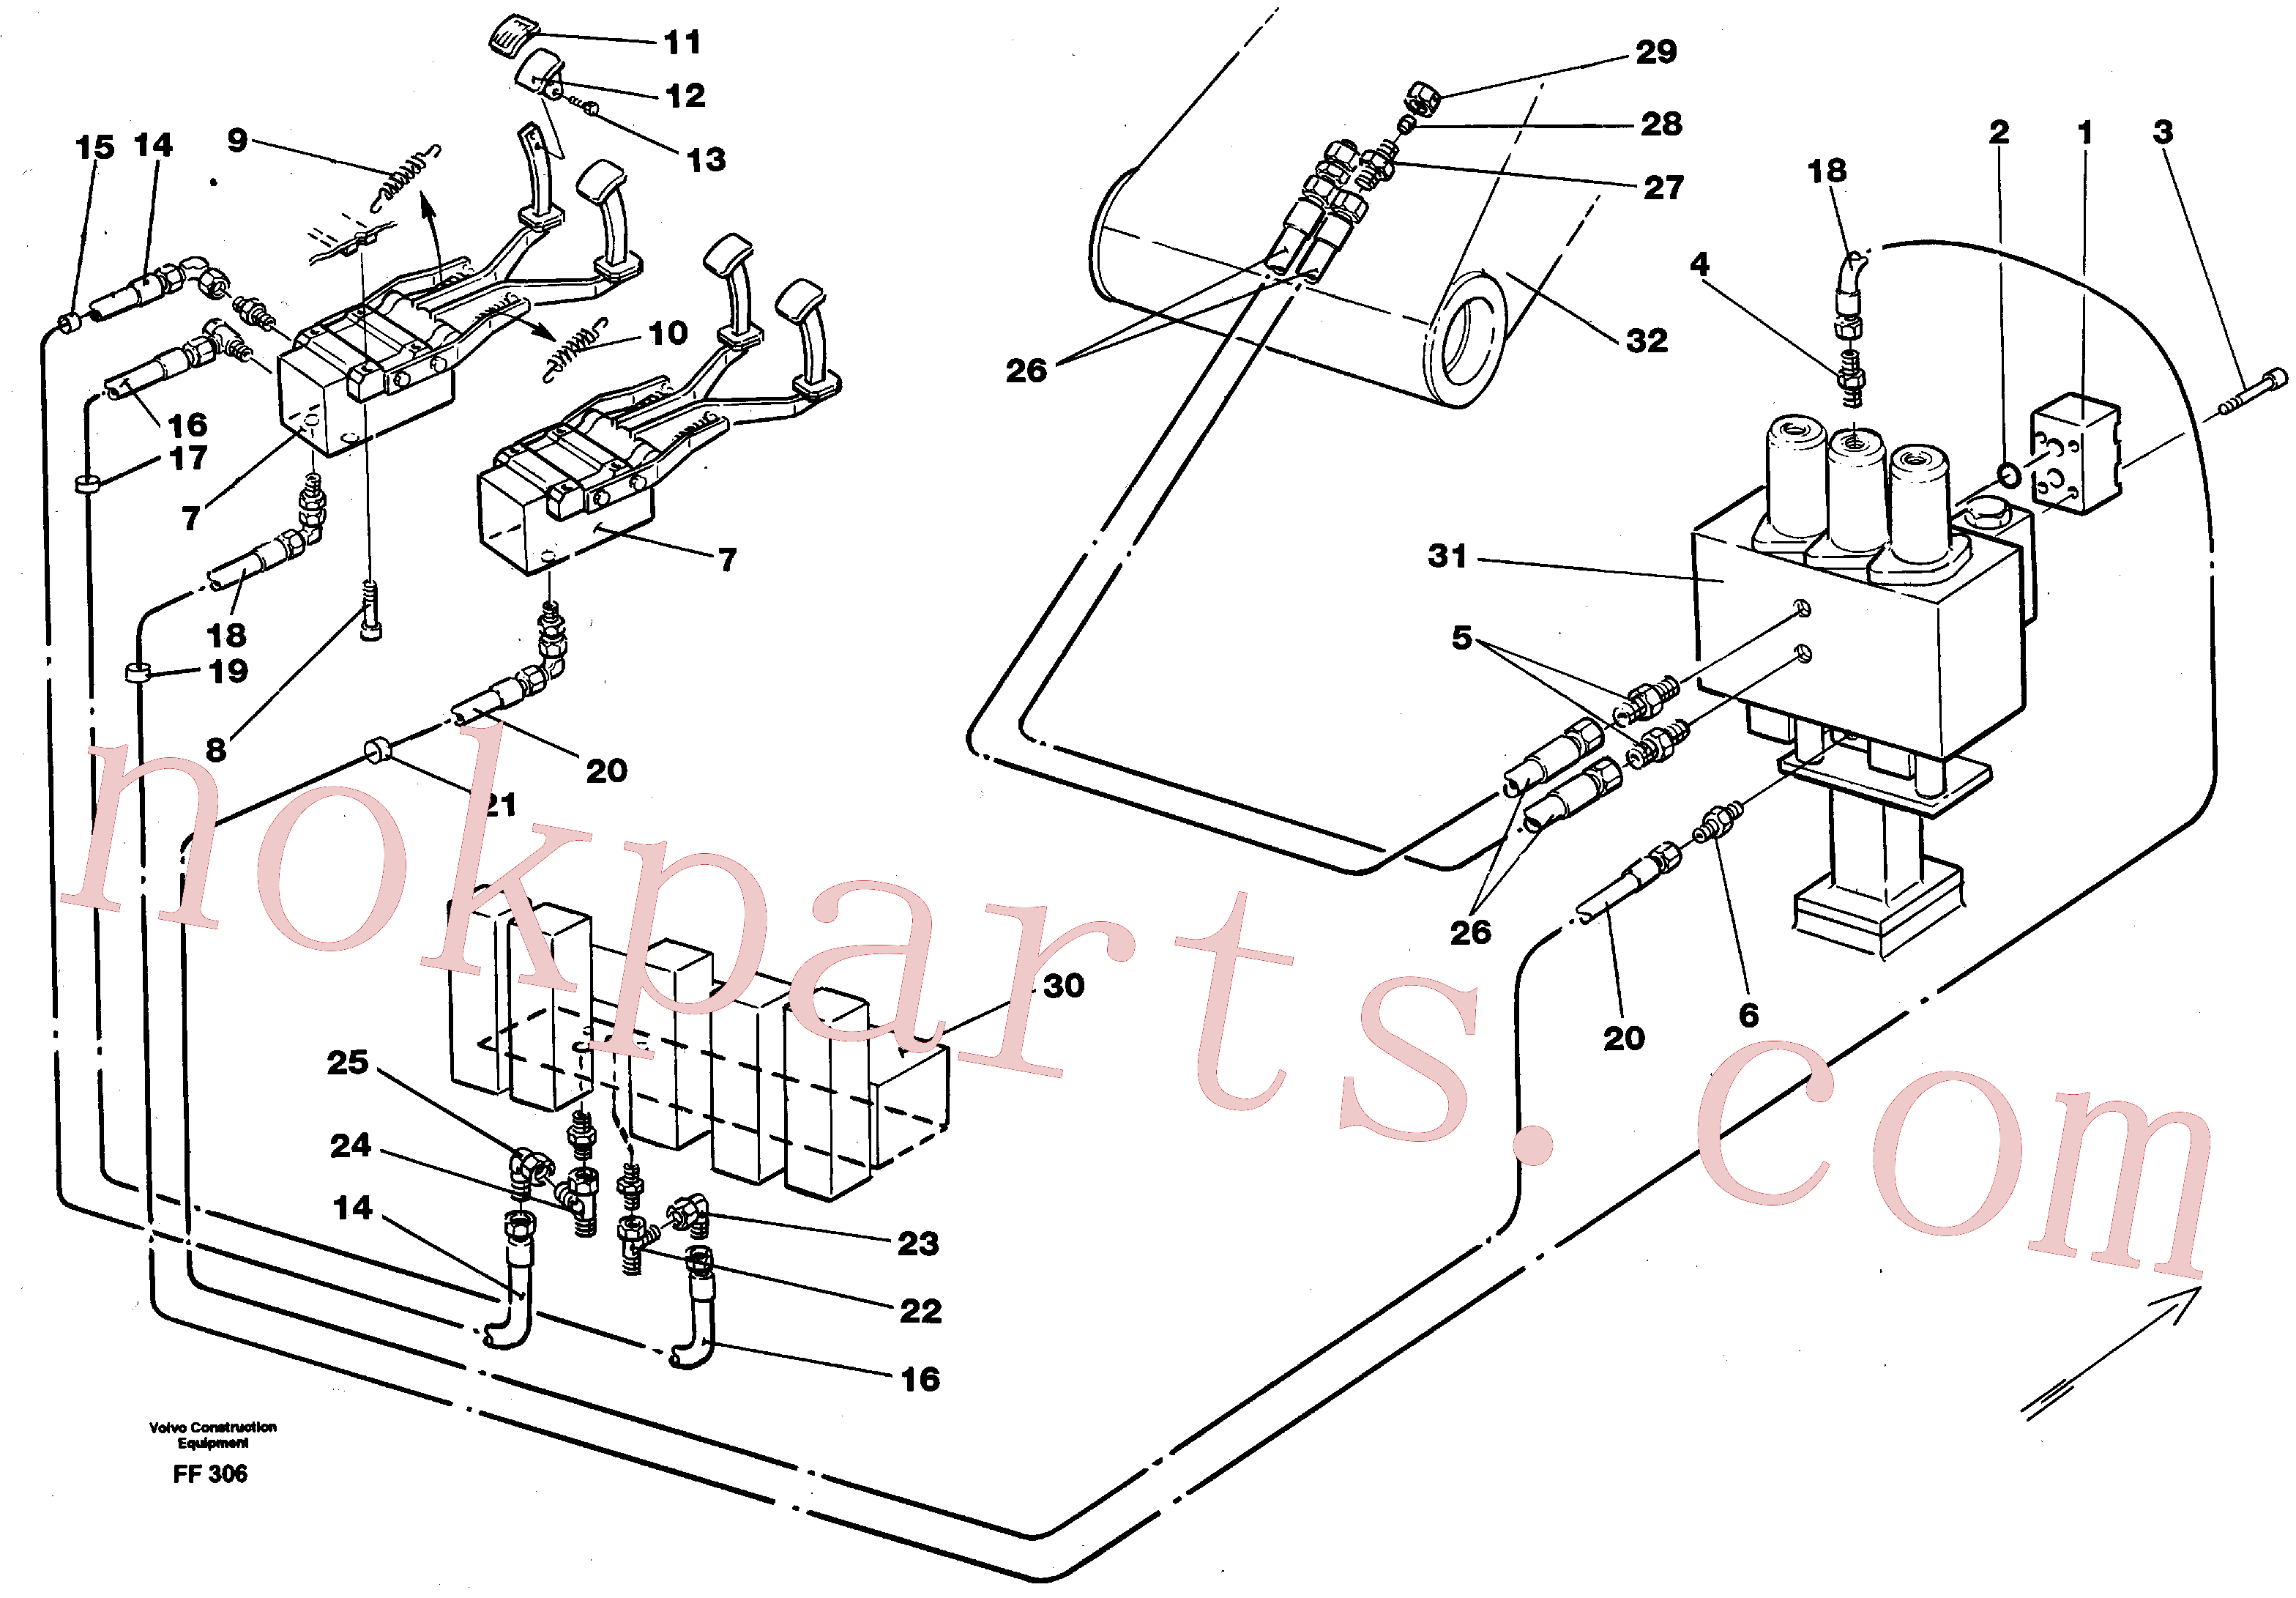 VOE14213152 for Volvo Slope bucket/rotating grab hydraulics in base machine(FF306 assembly)